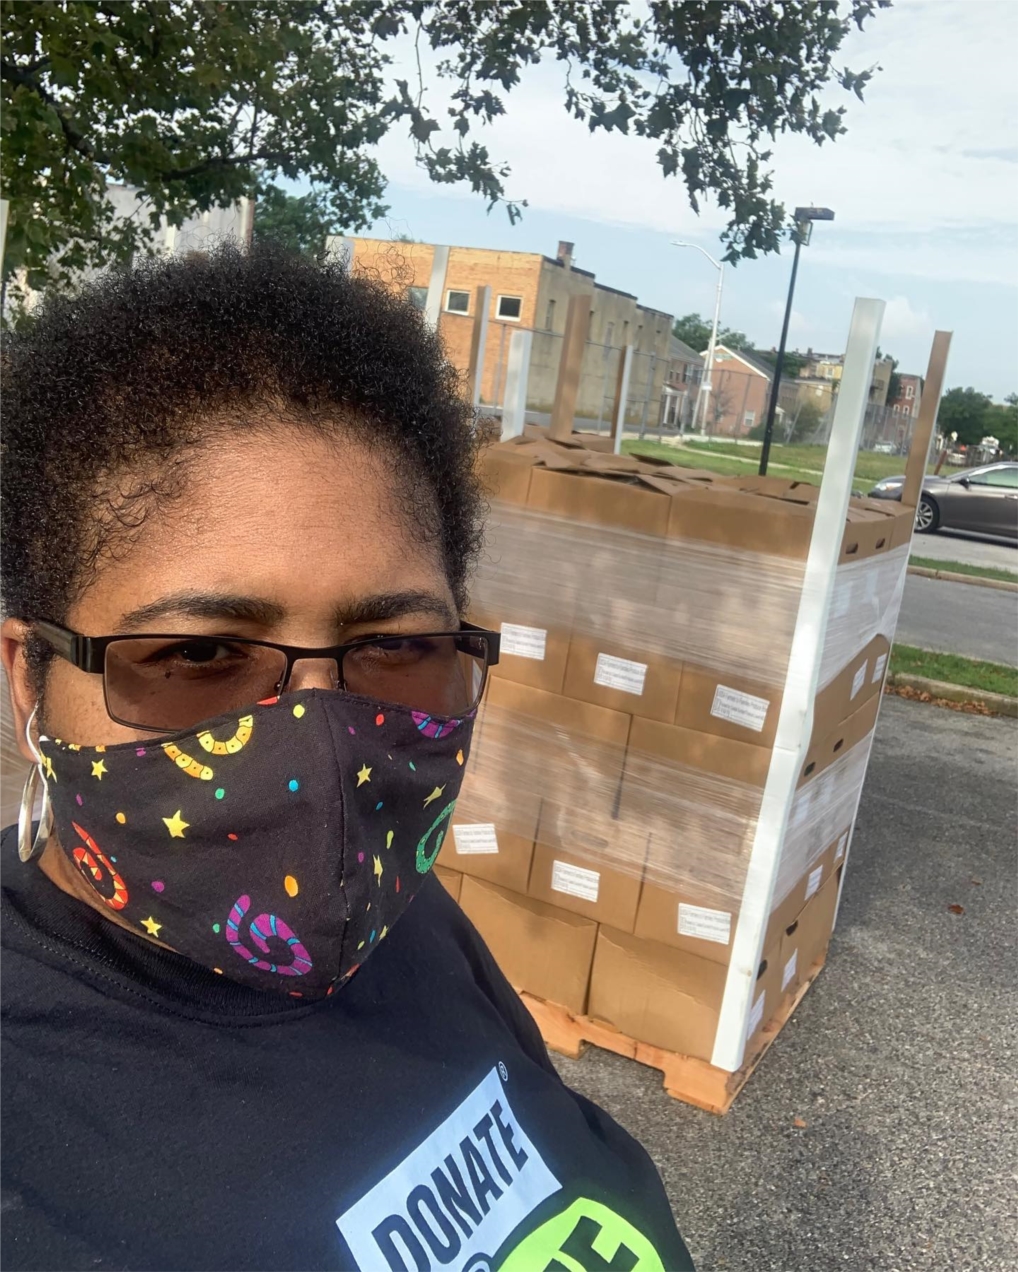 o	Caption: Latrice Price, Community Outreach Specialist, getting ready for a food giveaway in the Sandtown district of Baltimore City in July 2020 as part of The Decision Project initiative.